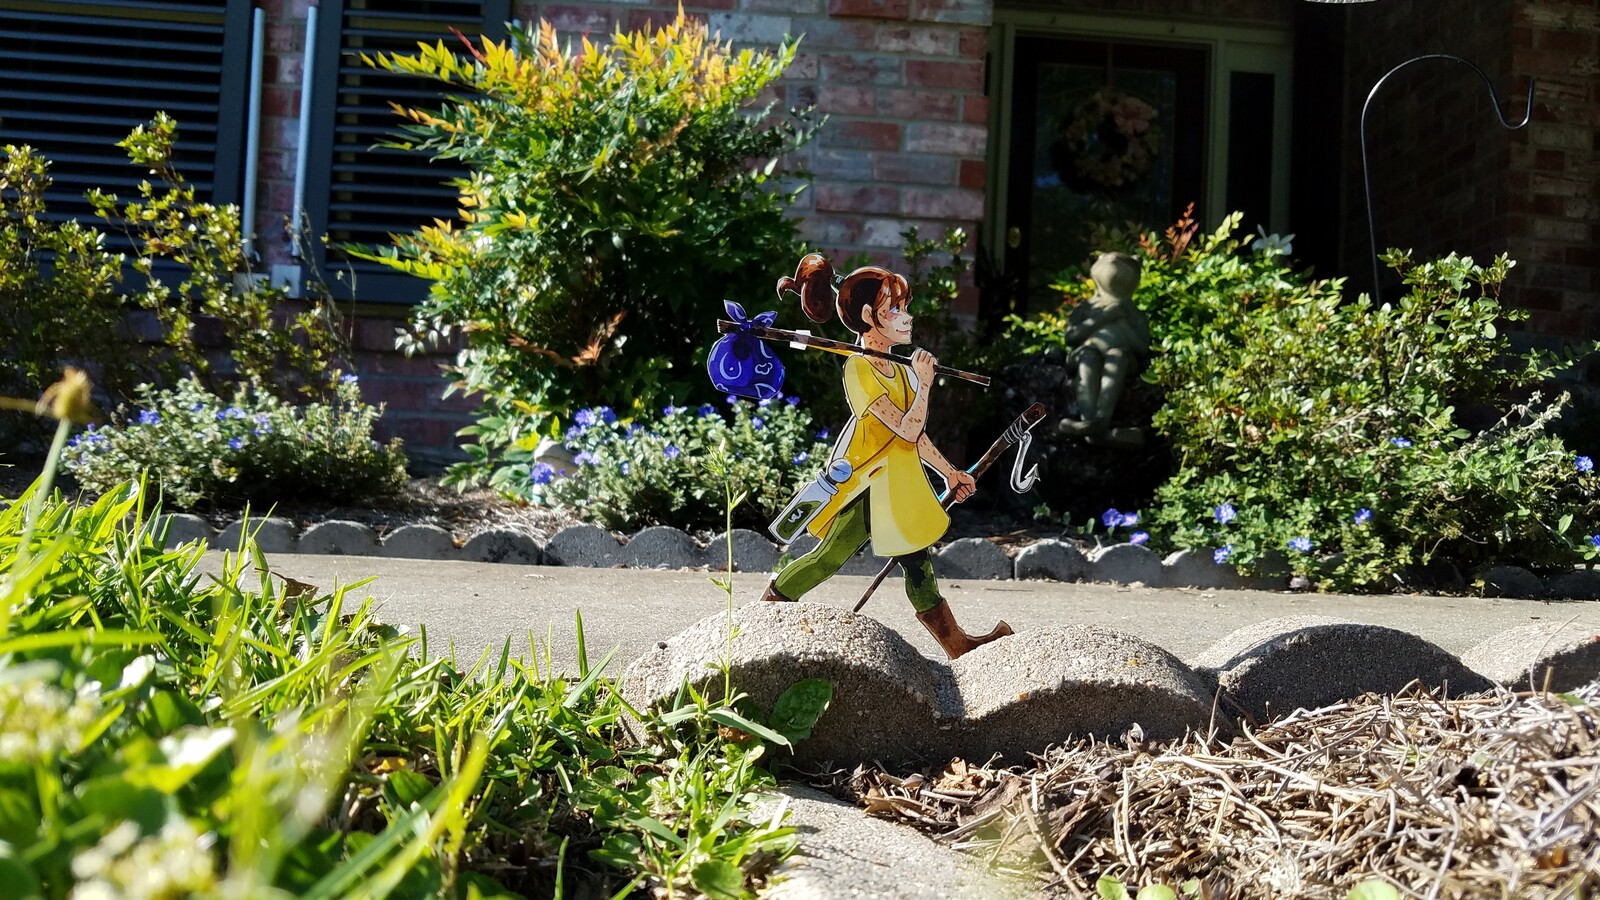 Cut paper character posed in a real world environment create an augmented reality perfect for suburban fantasy.